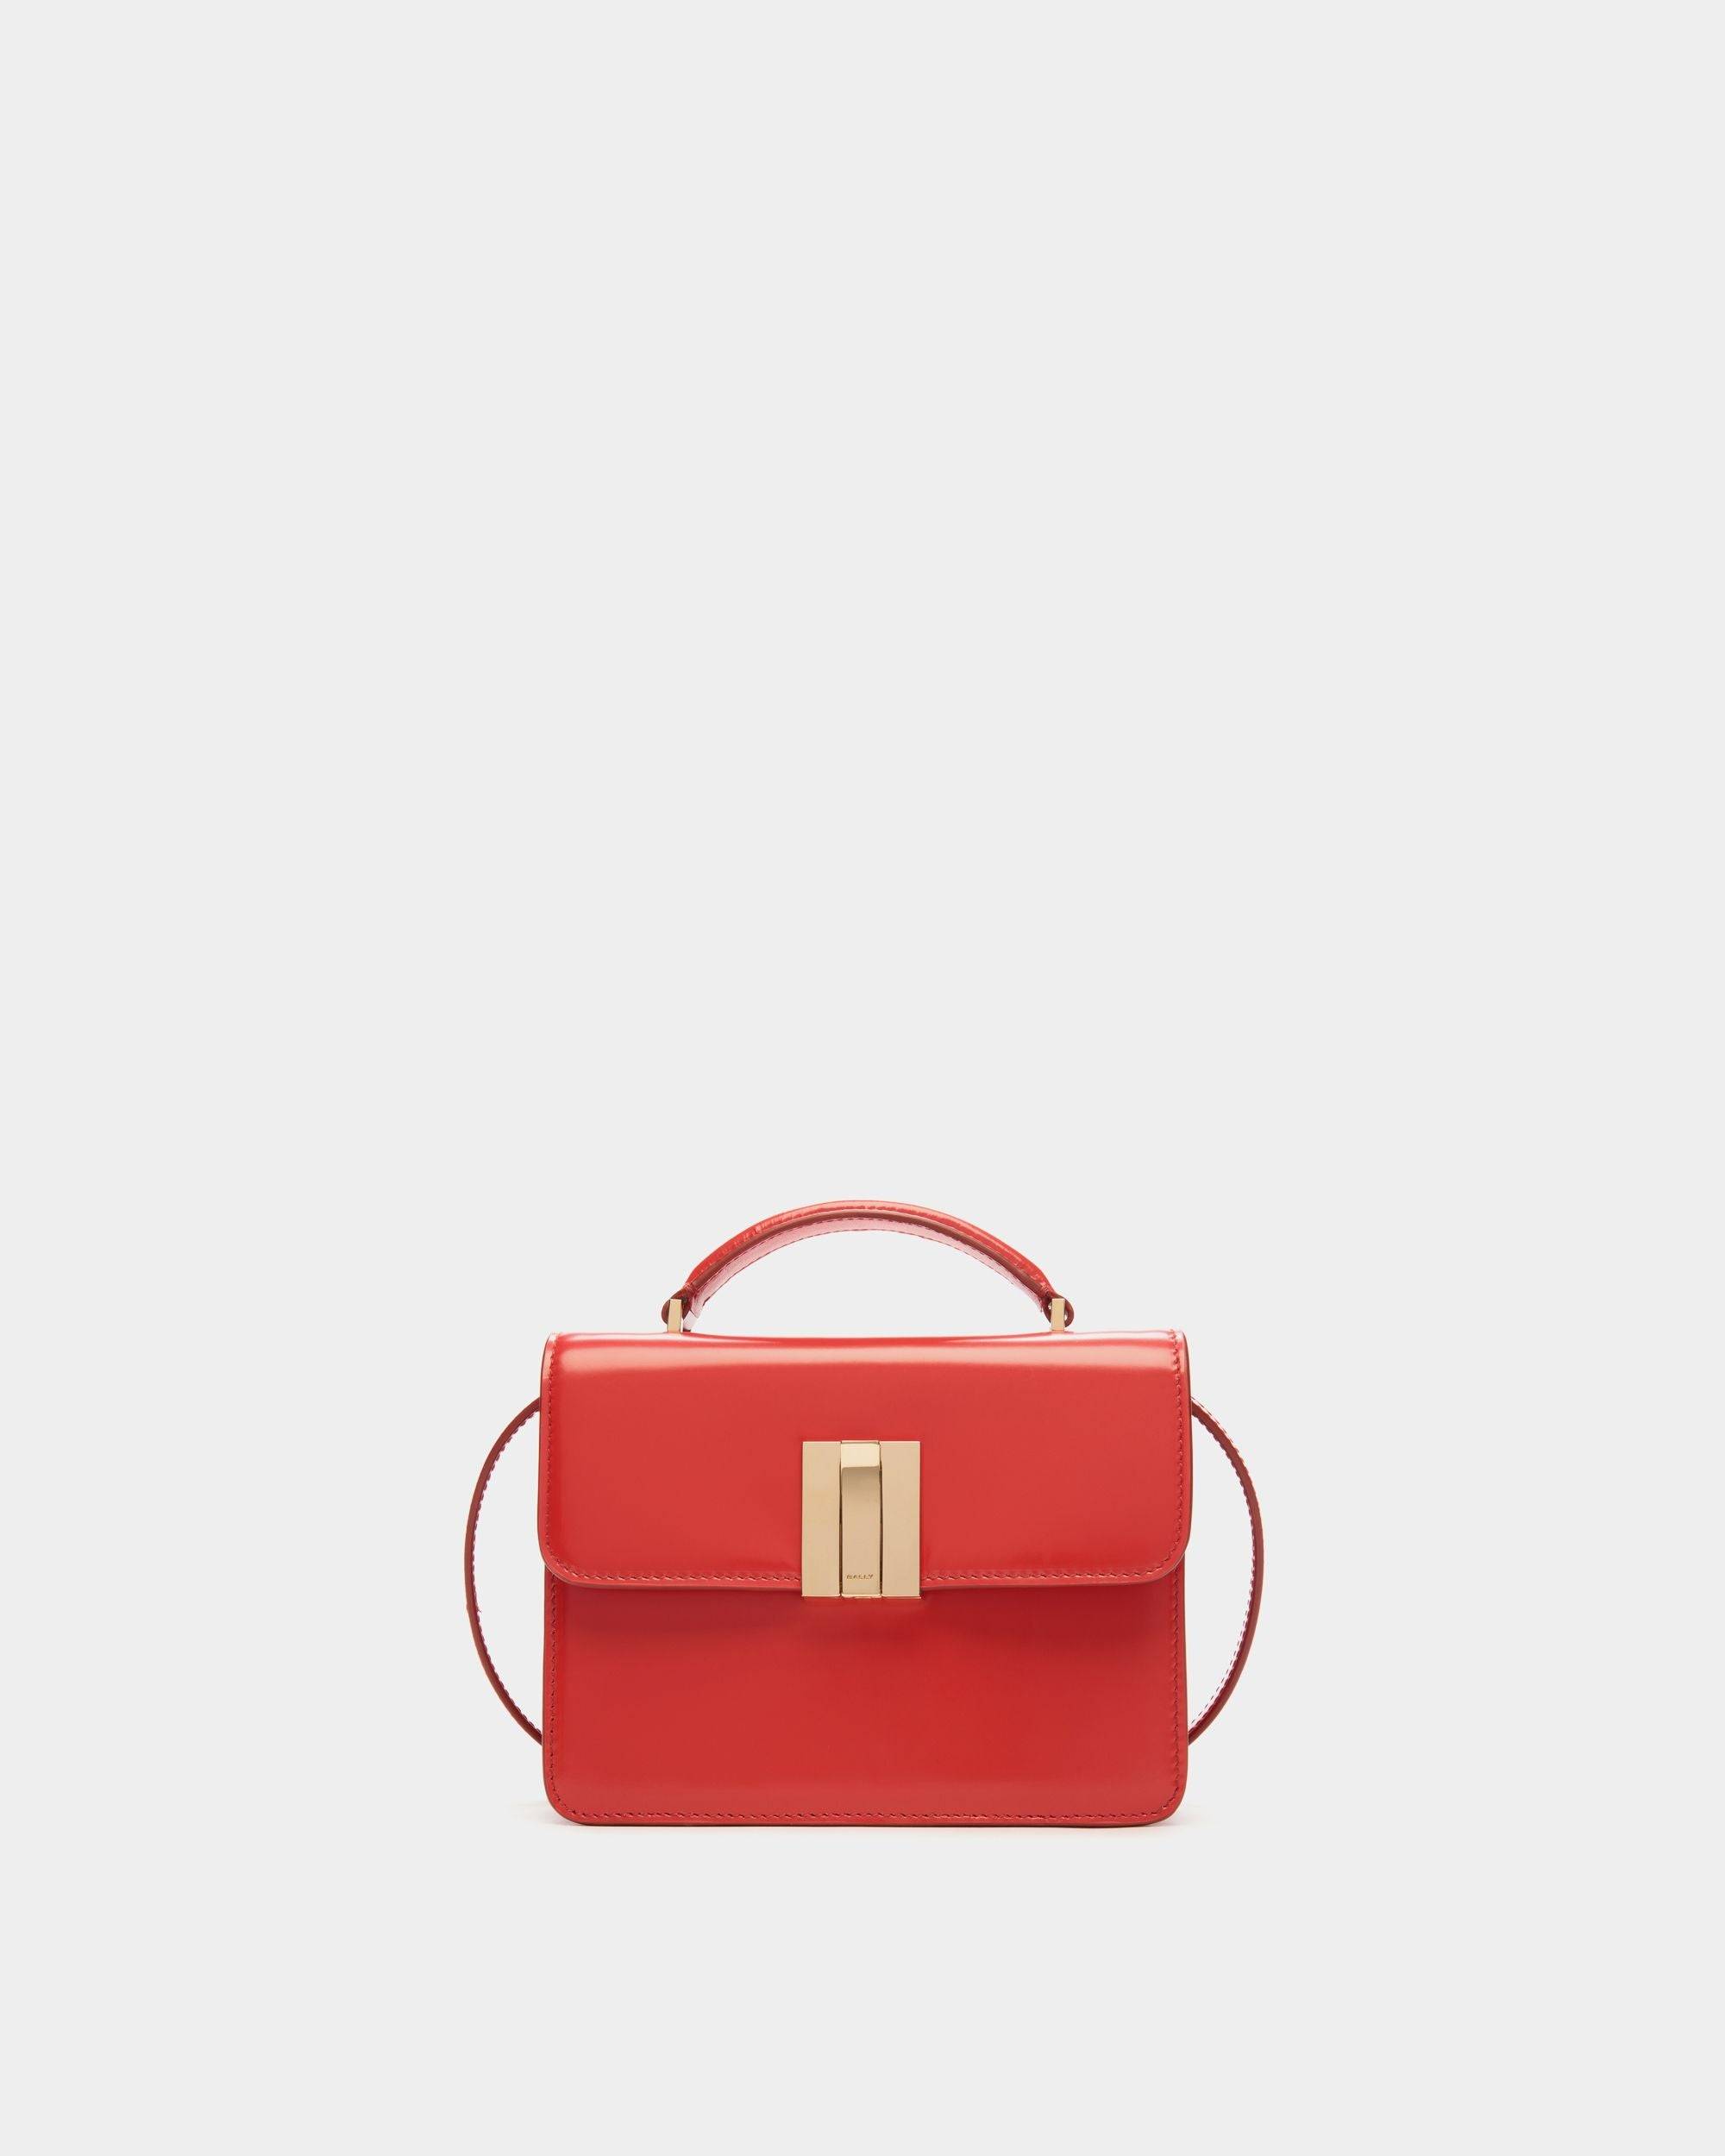 Women's Ollam Mini Top Handle Bag in Candy Red Brushed Leather | Bally | Still Life Front